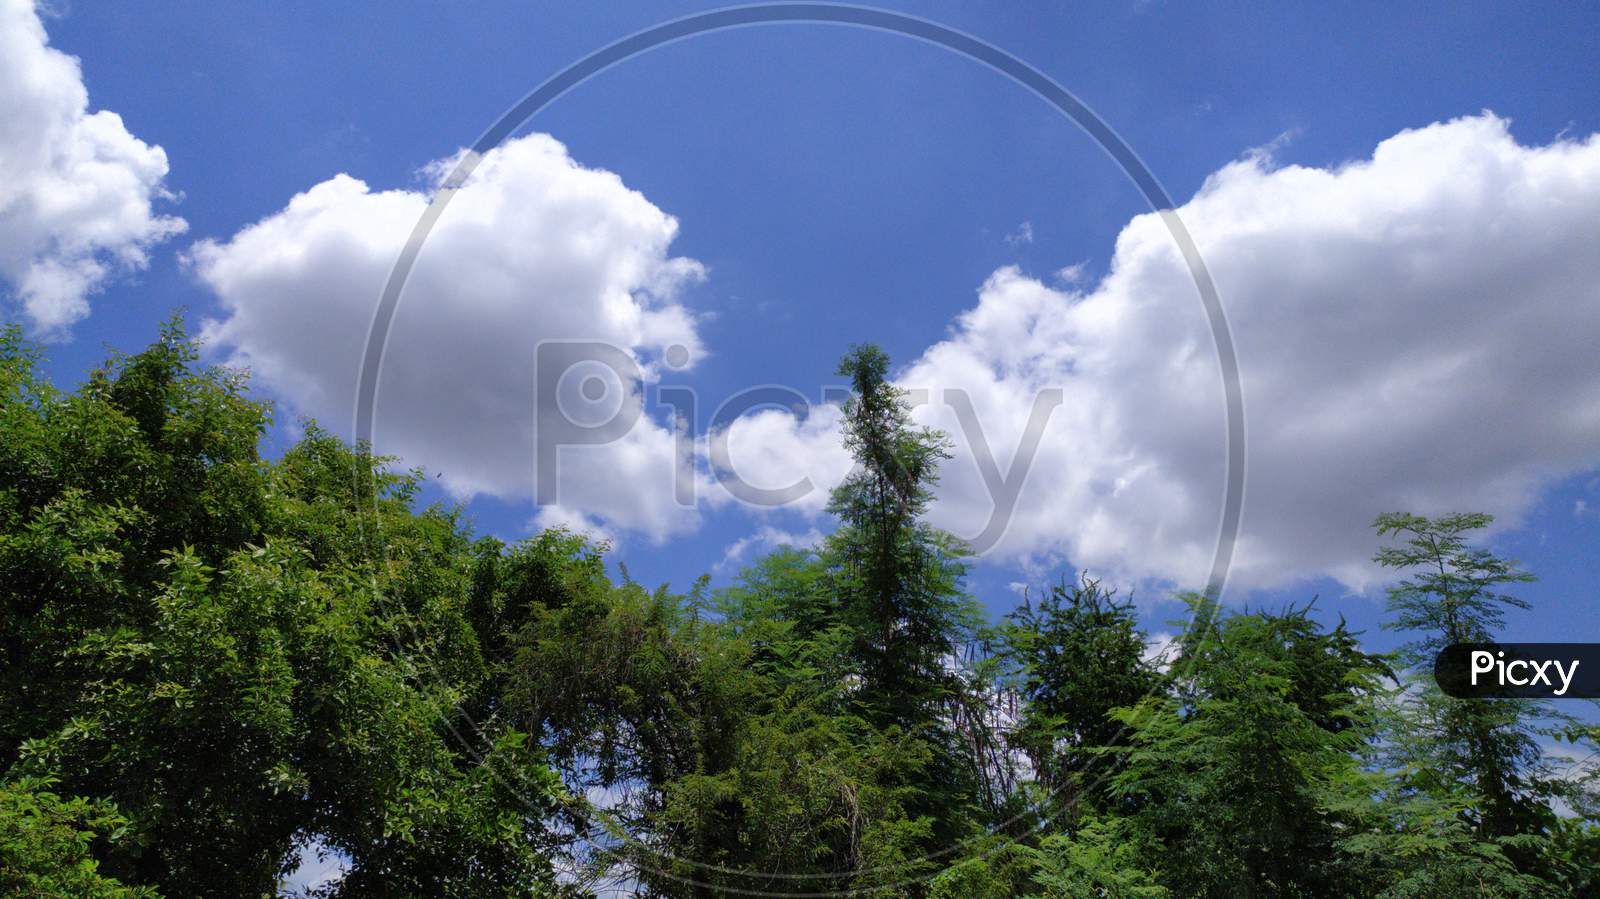 Blue sky clouds and trees